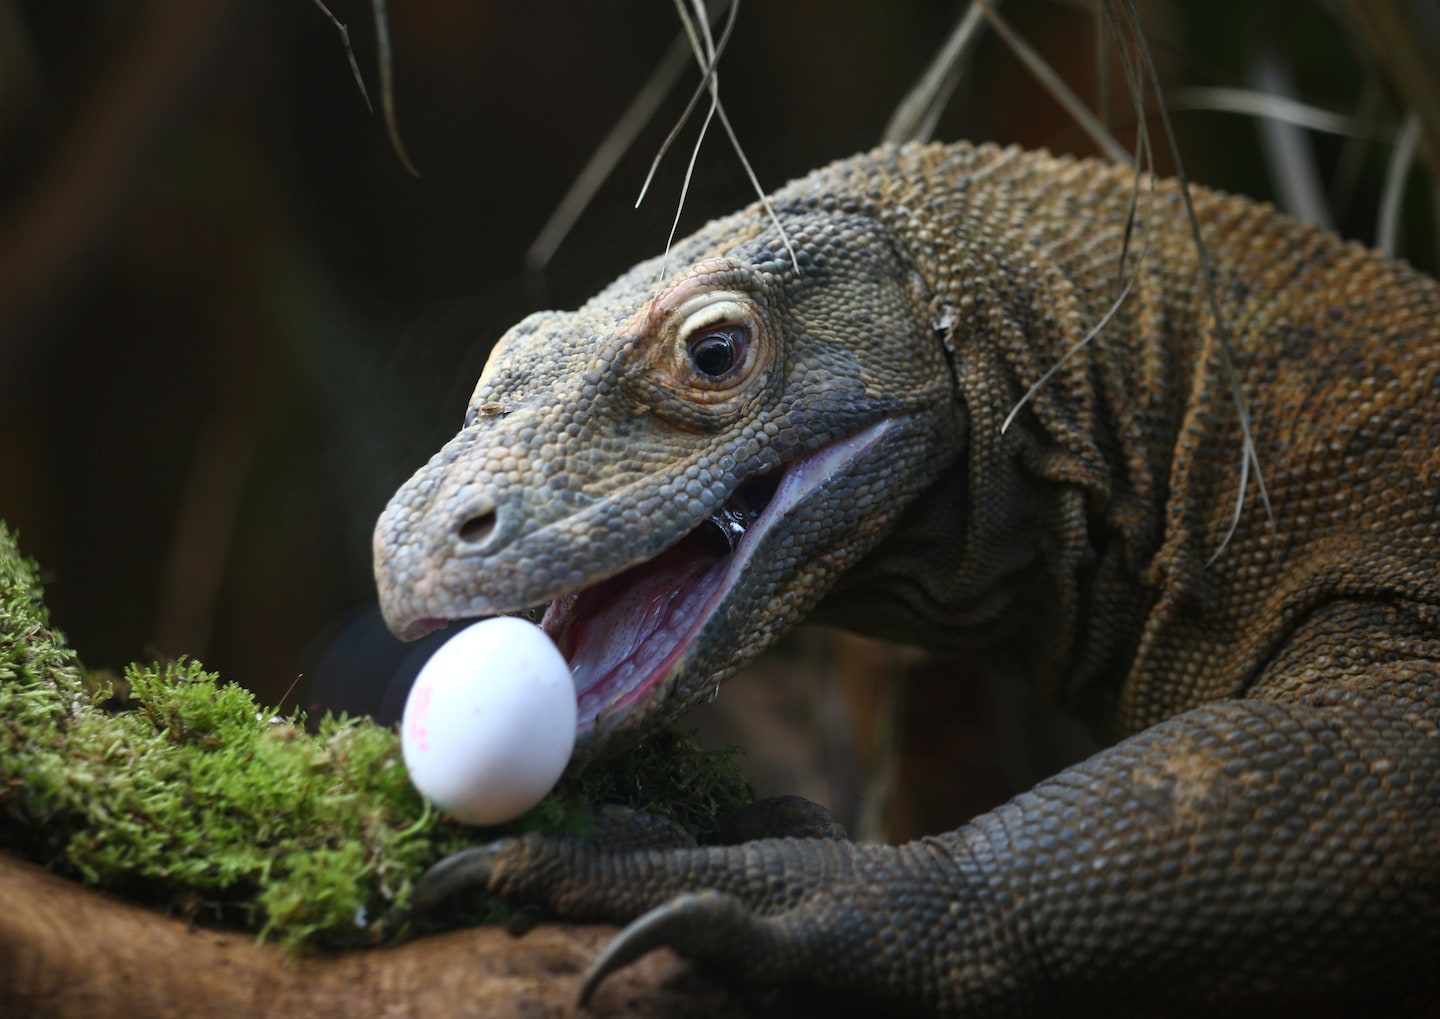 Komodo dragons have iron-coated teeth to rip apart prey, scientists find